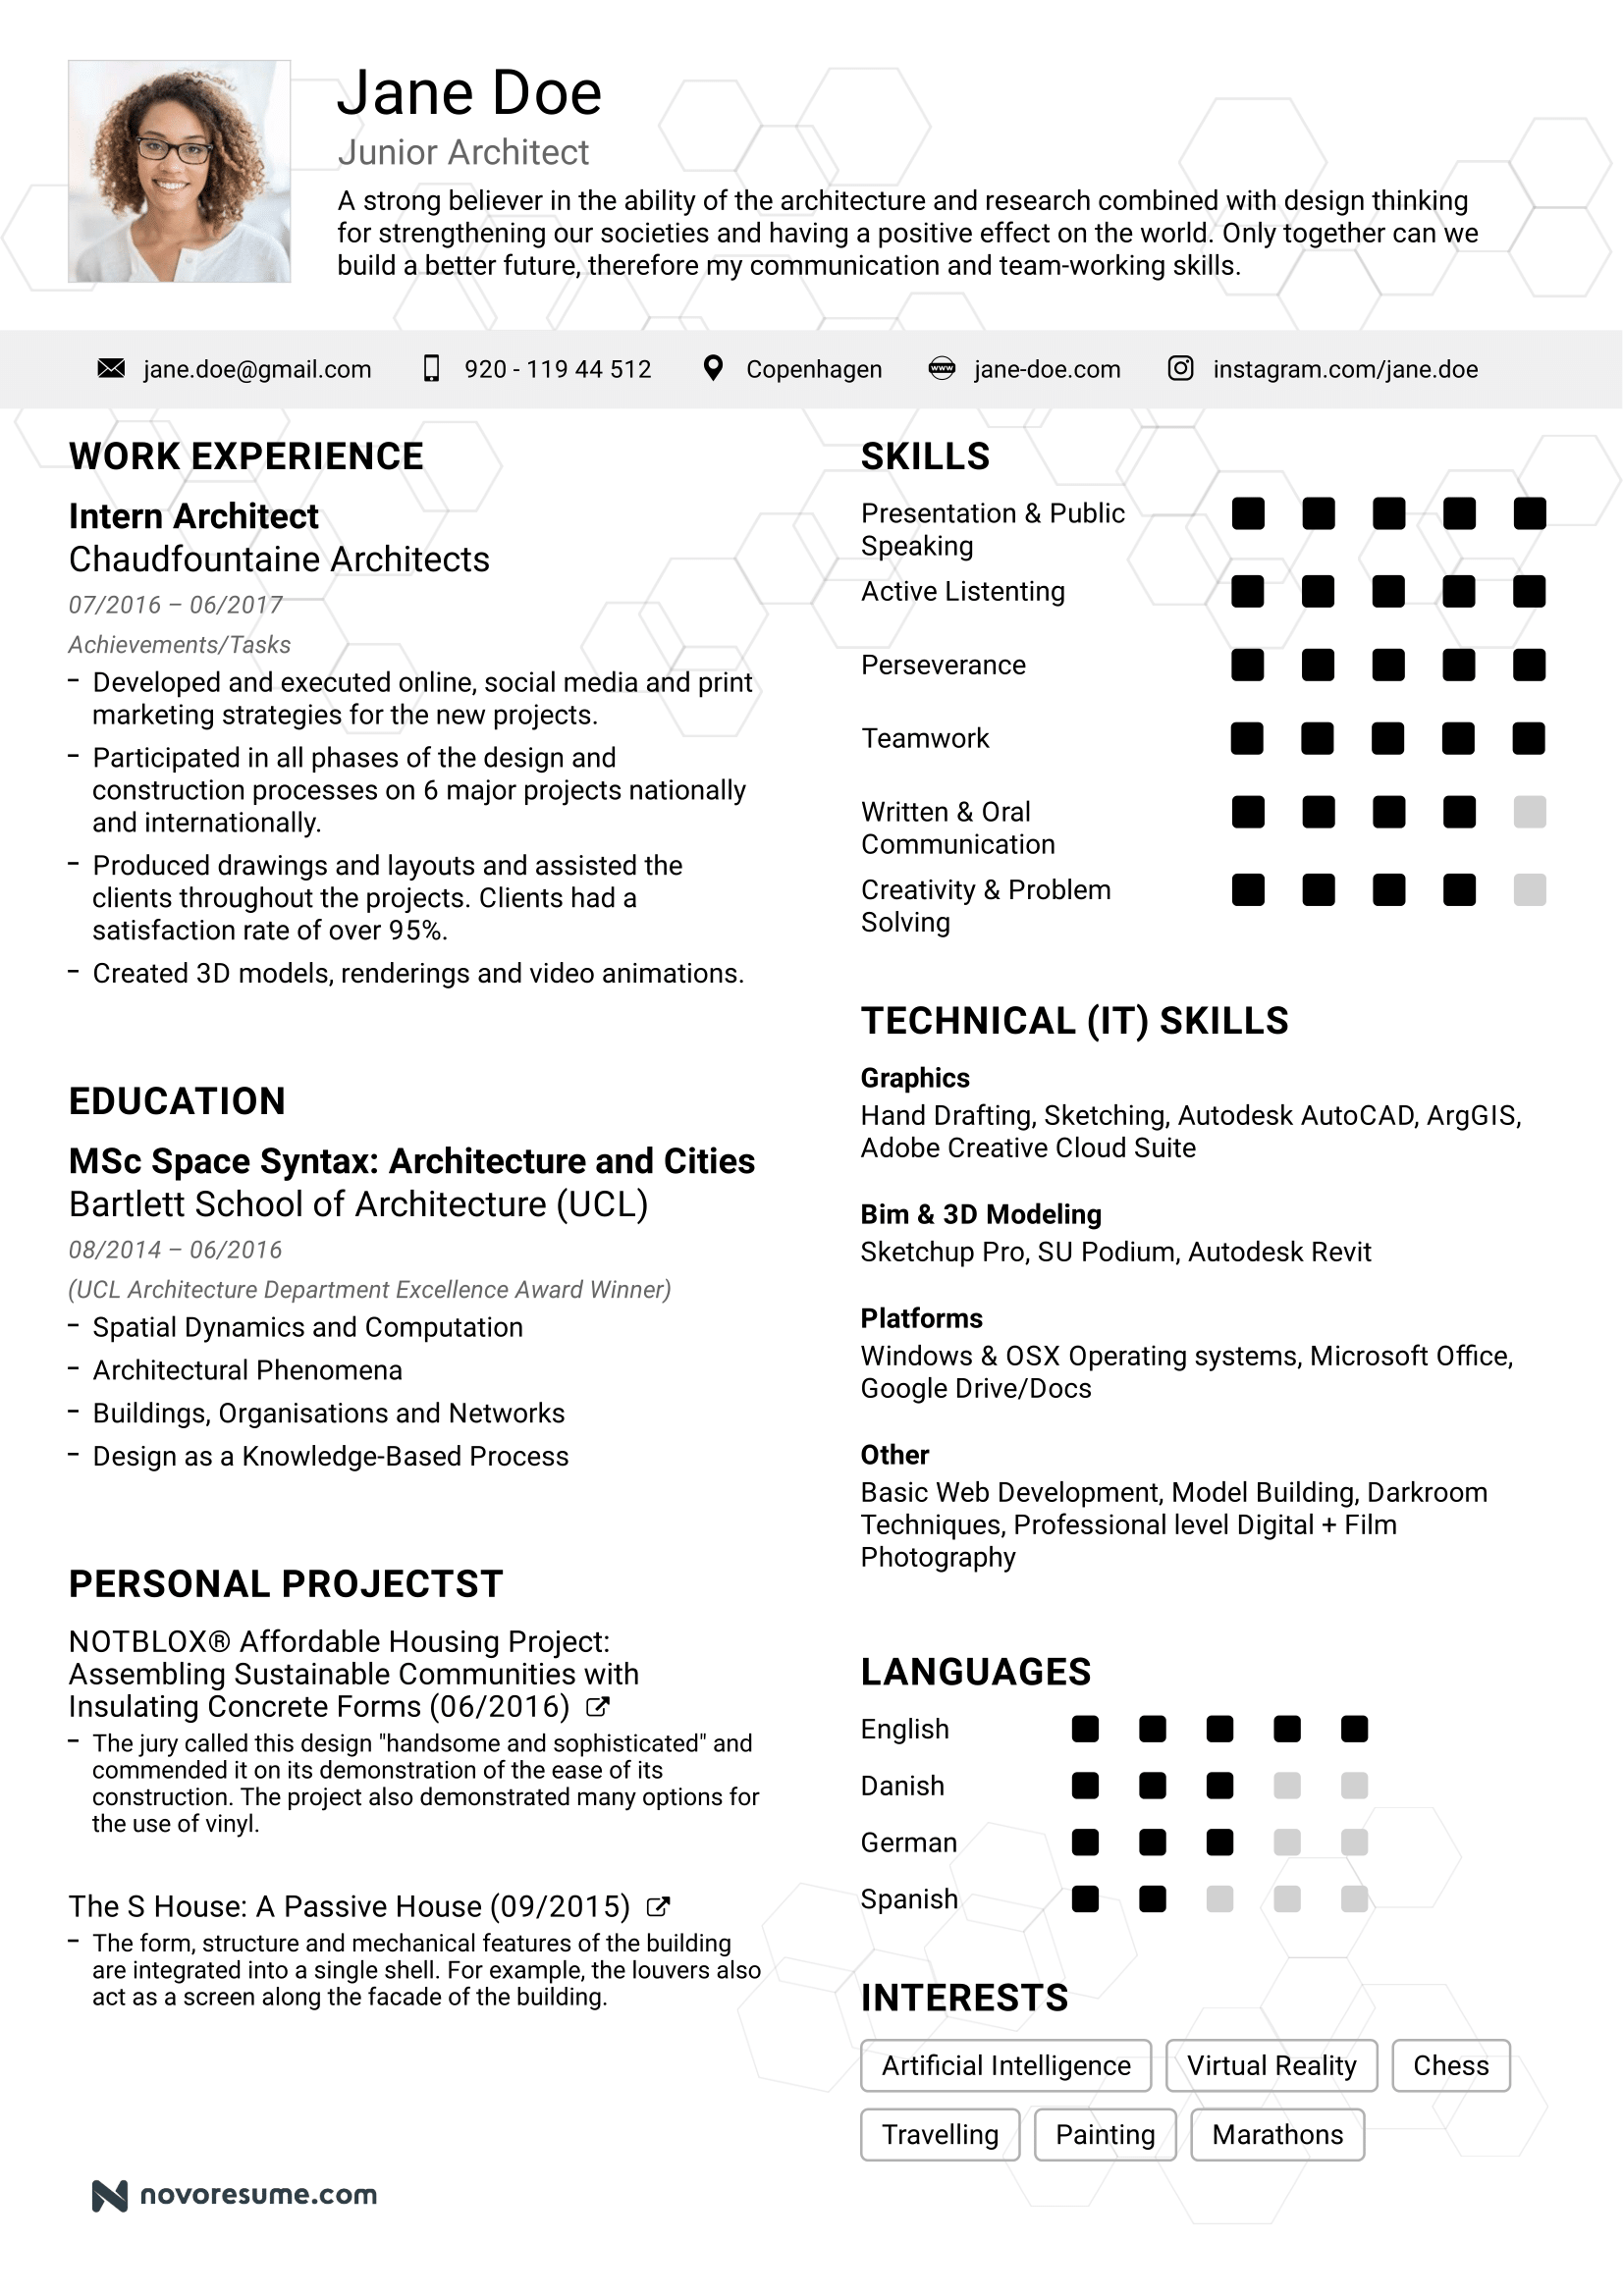 Can You Really Find resume?